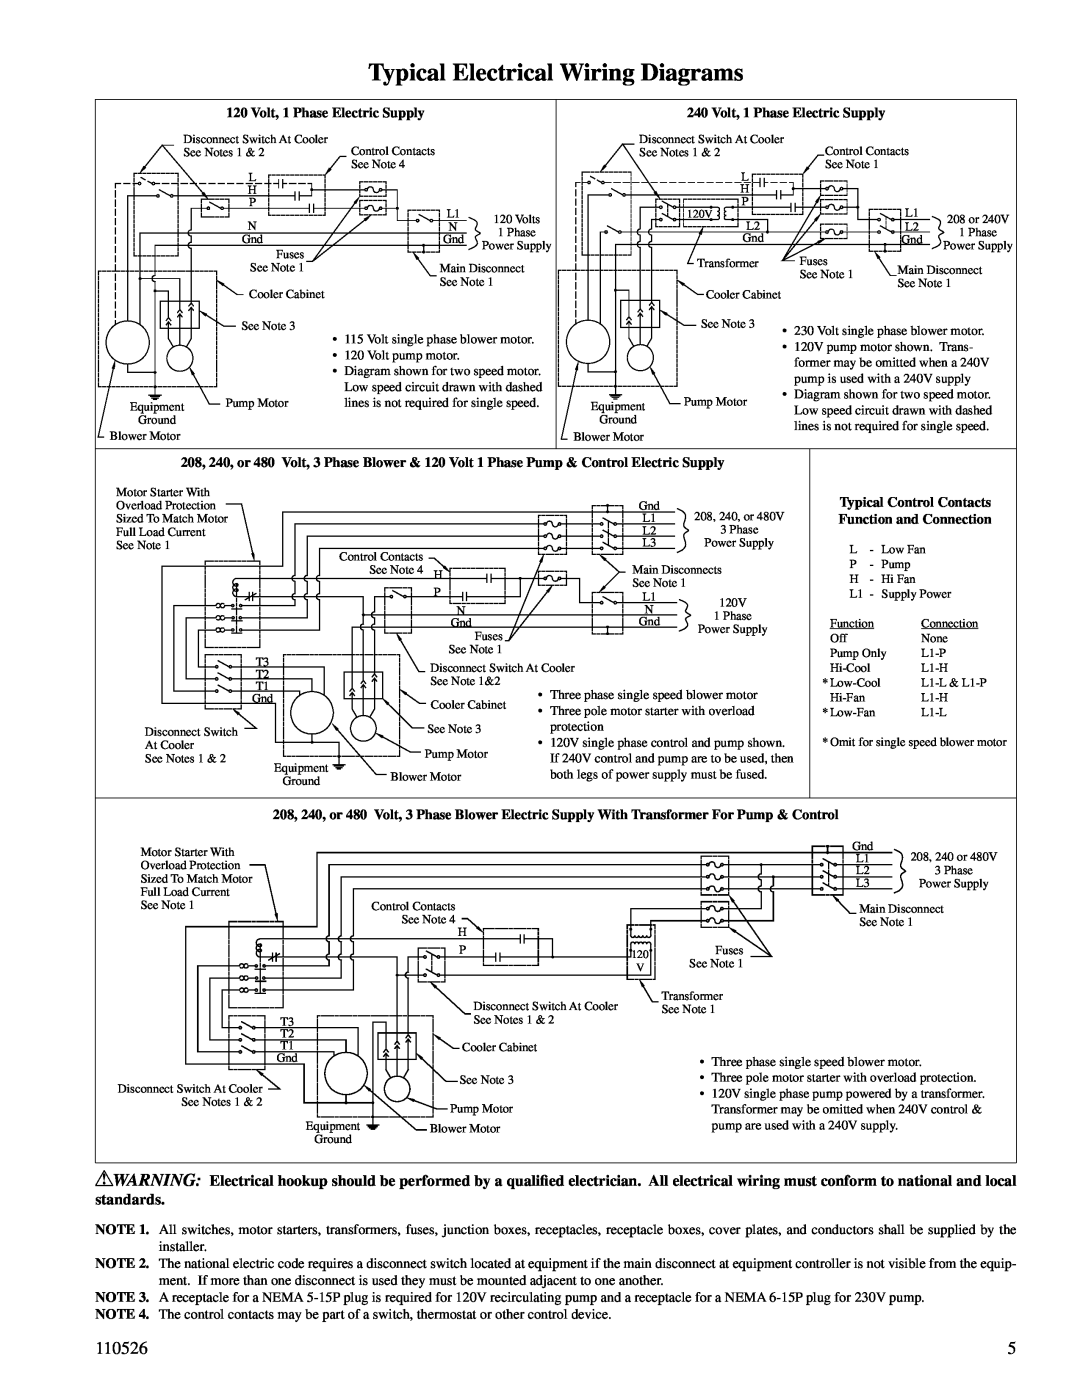 Essick Air AS20012, AS15012, AS100, SAD150 Typical Electrical Wiring Diagrams, 110526, Volt, 1 Phase Electric Supply 